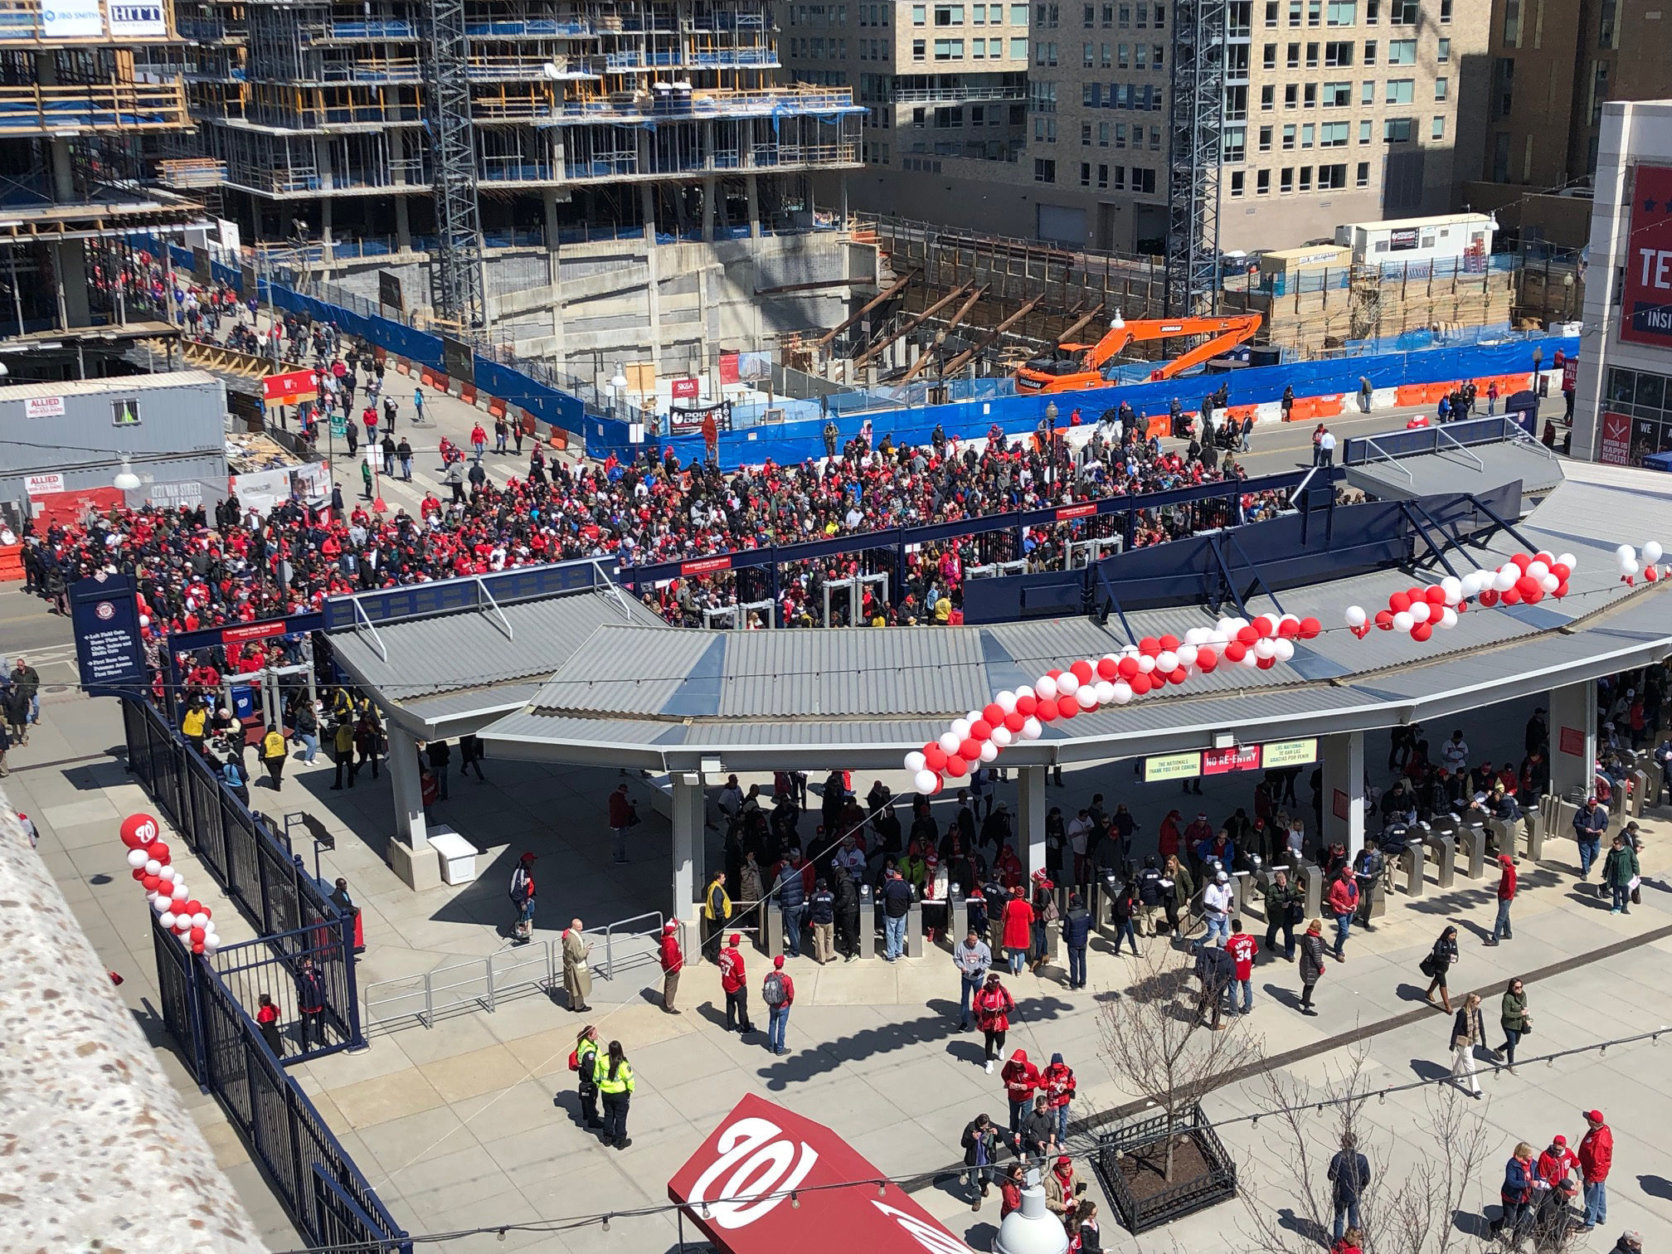 Huge crowds of fans gather at the gates to Nationals Park for opening day in April 2018. (WTOP/Julia Ziegler)